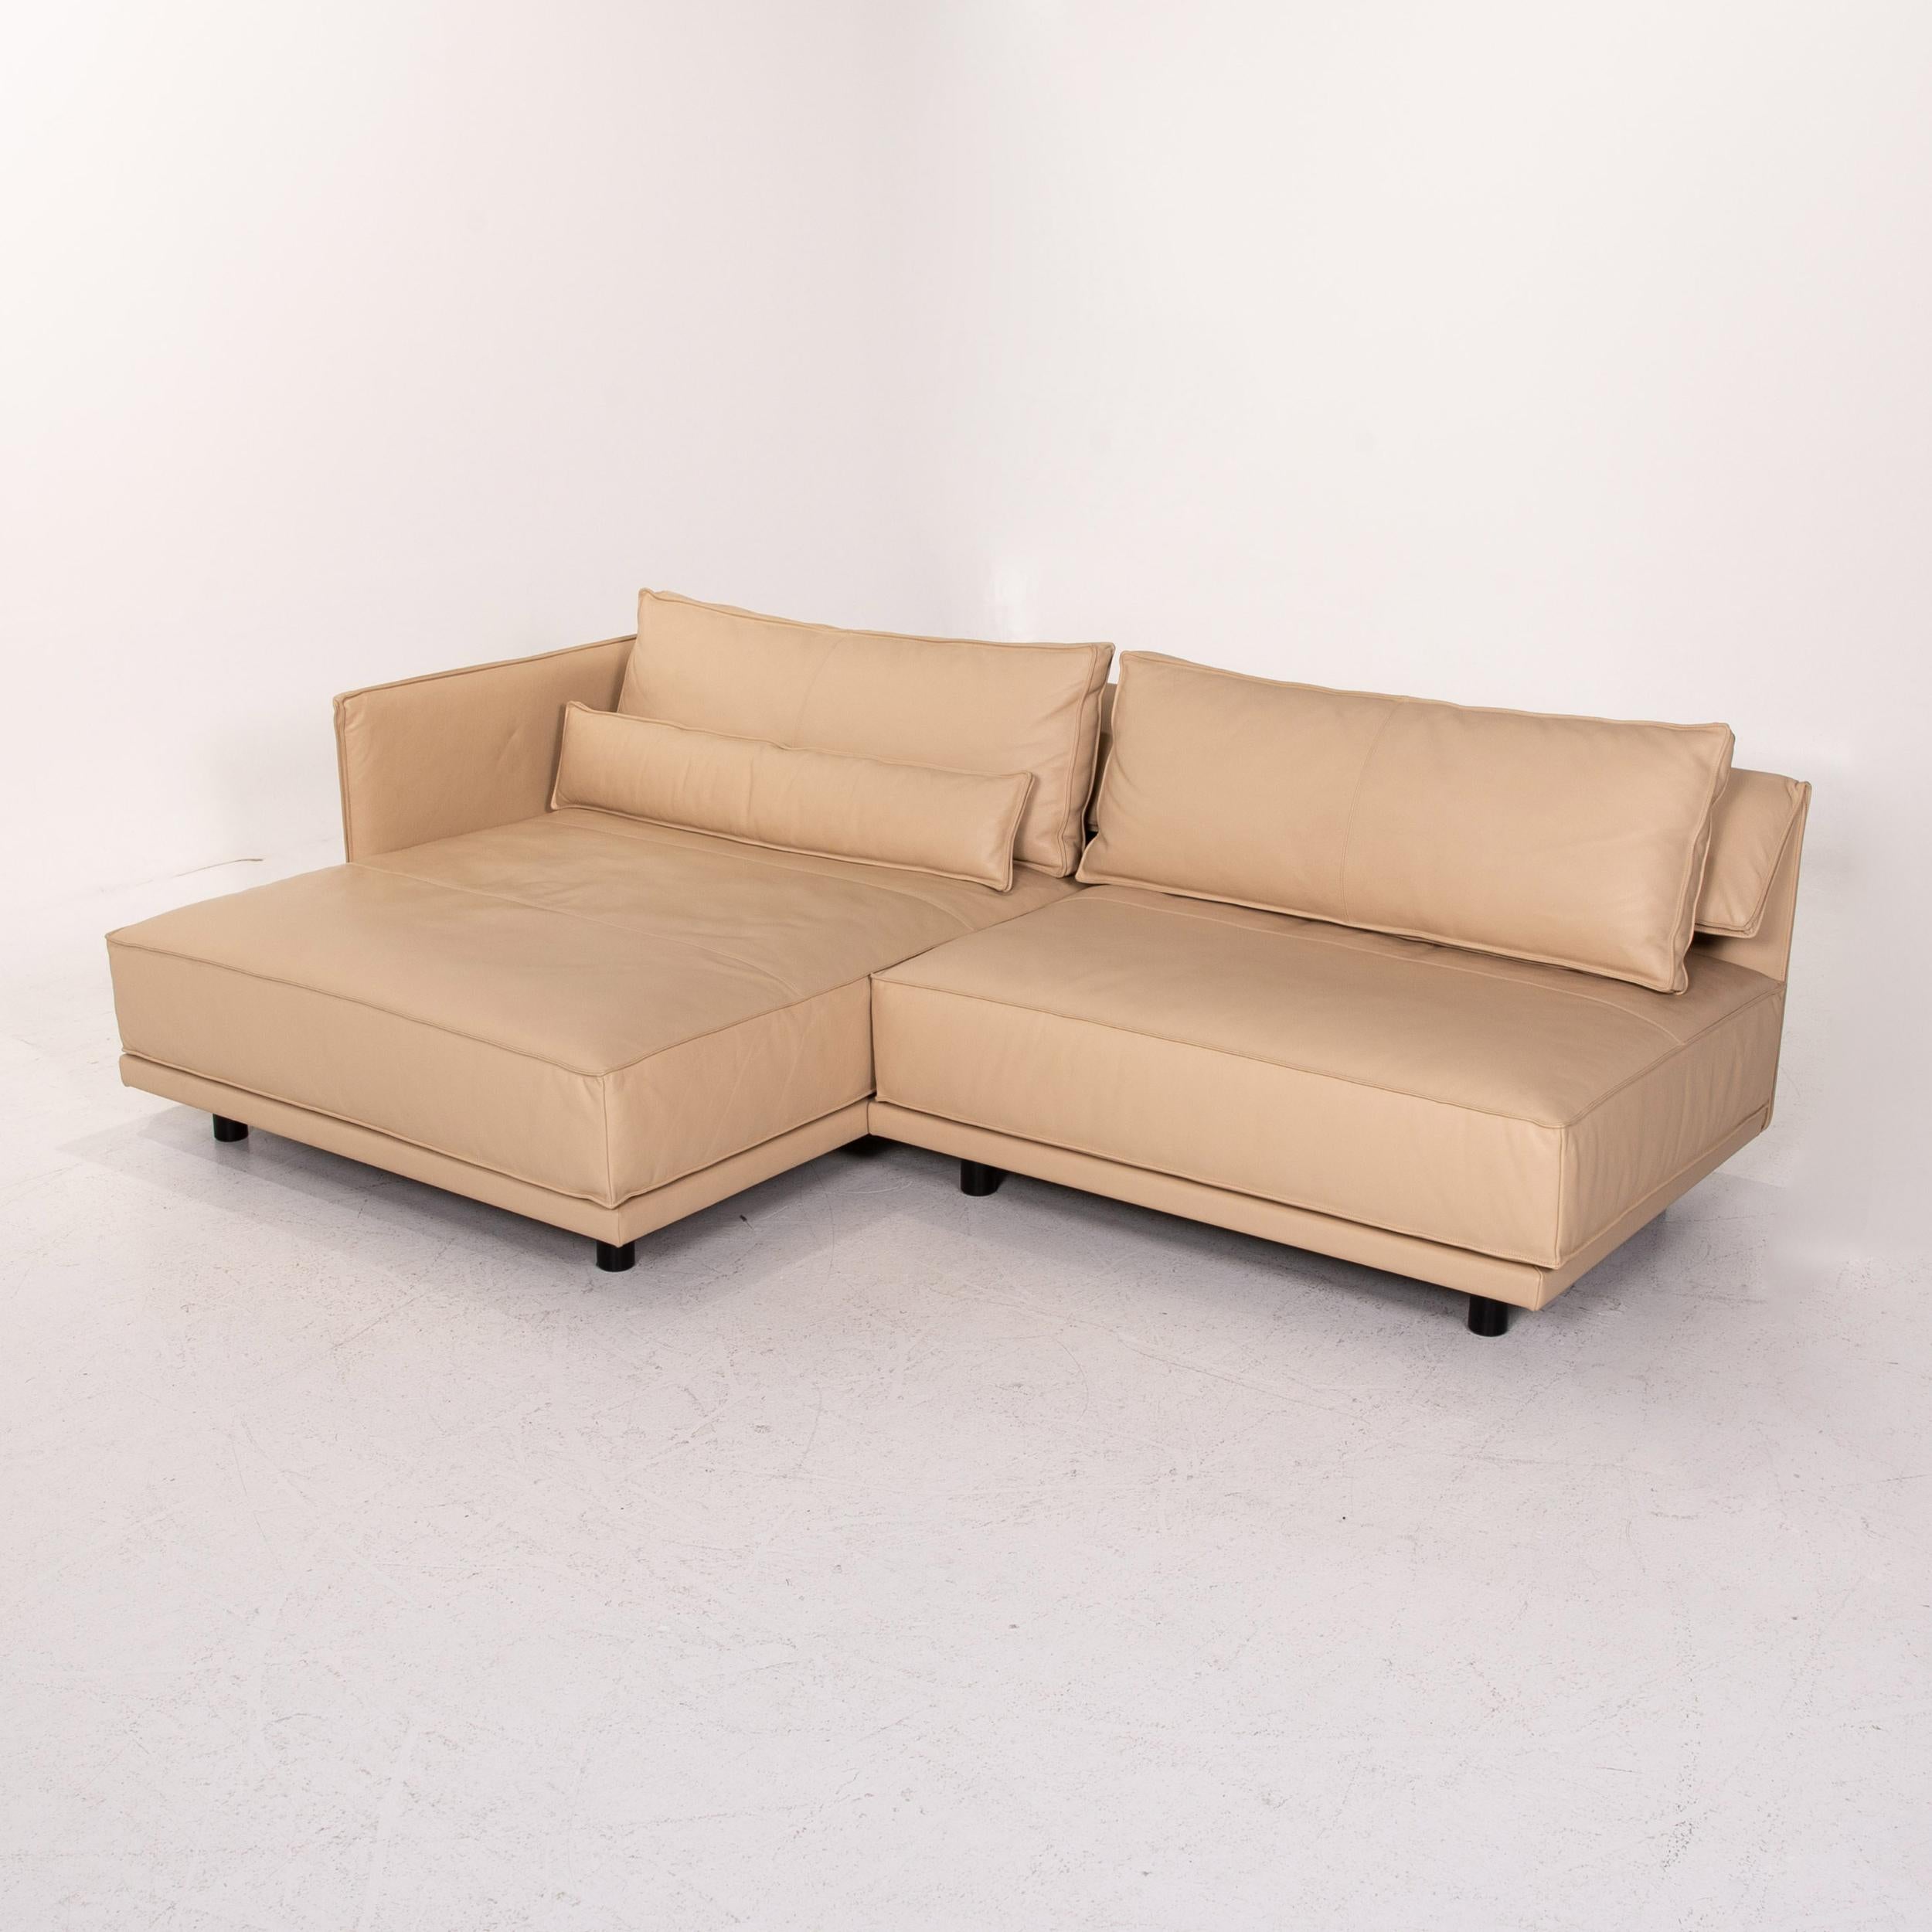 Contemporary IP Design Cube Lounge Leather Corner Sofa Beige Sofa Couch For Sale